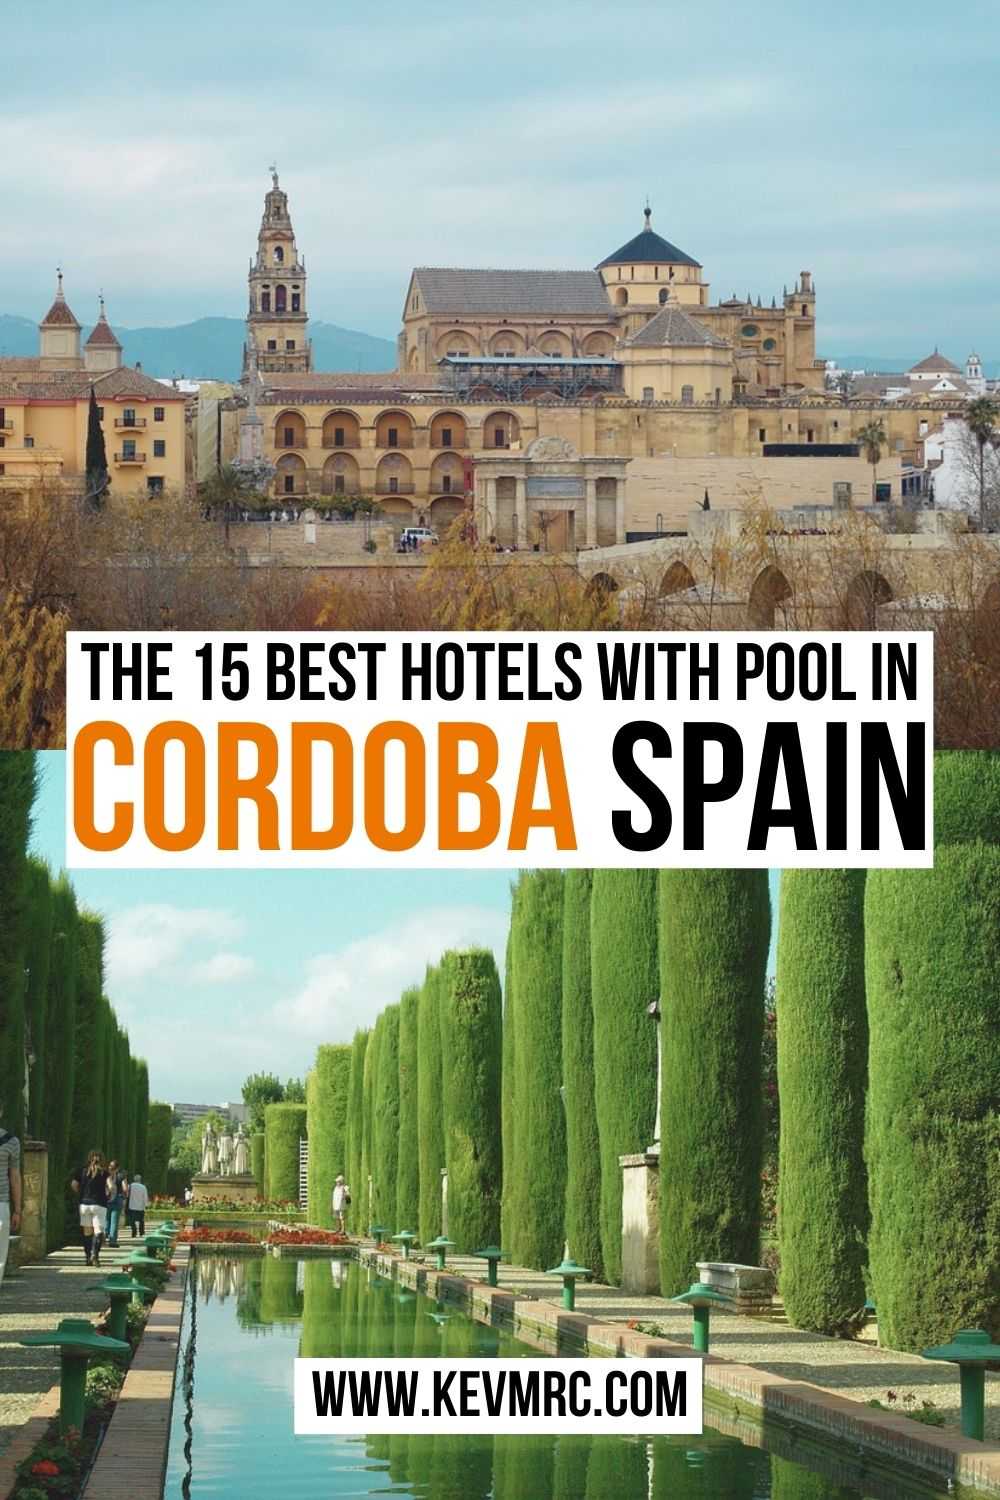 I've carefully handpicked the 15 very best Cordoba hotels with pool and gathered them in this guide to make your task easier. spain travel | cordoba travel | best hotels in cordoba spain